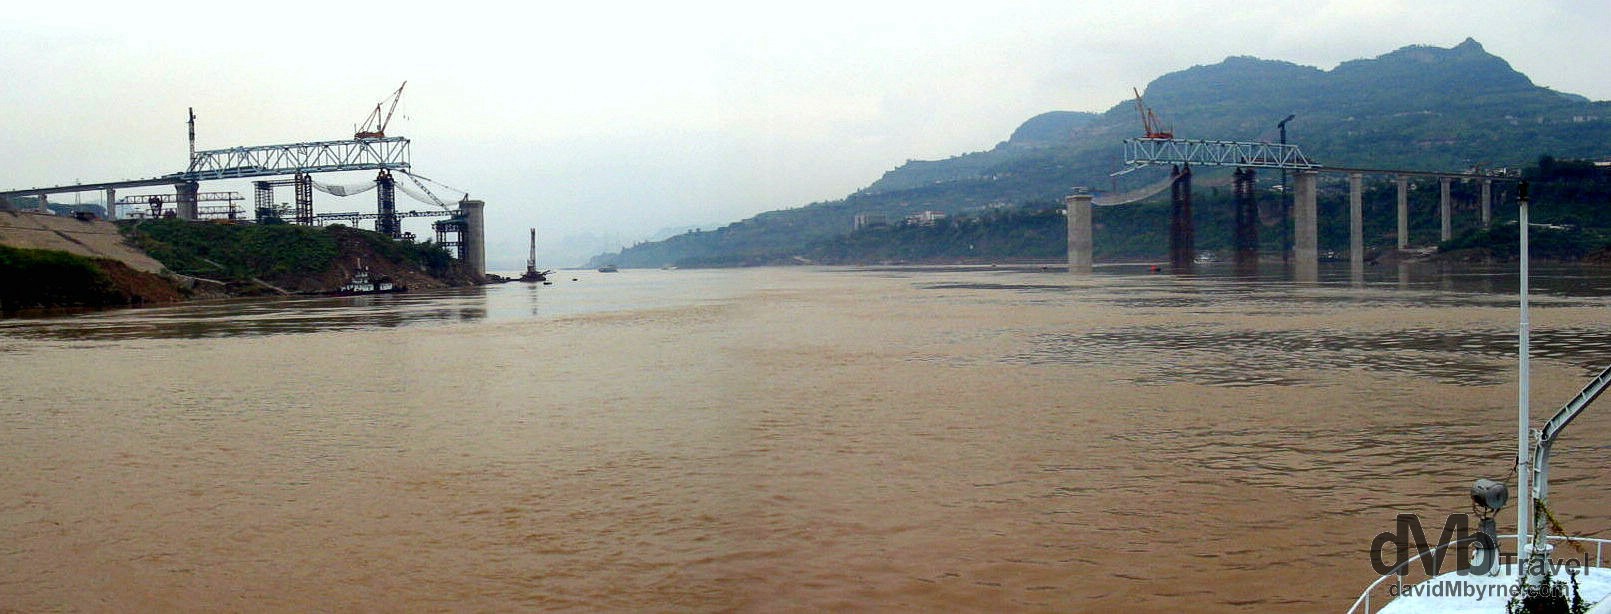 The construction of a bridge spanning the Yangtze River as seen from the river near Wan Xian, central China. September 26th, 2004.